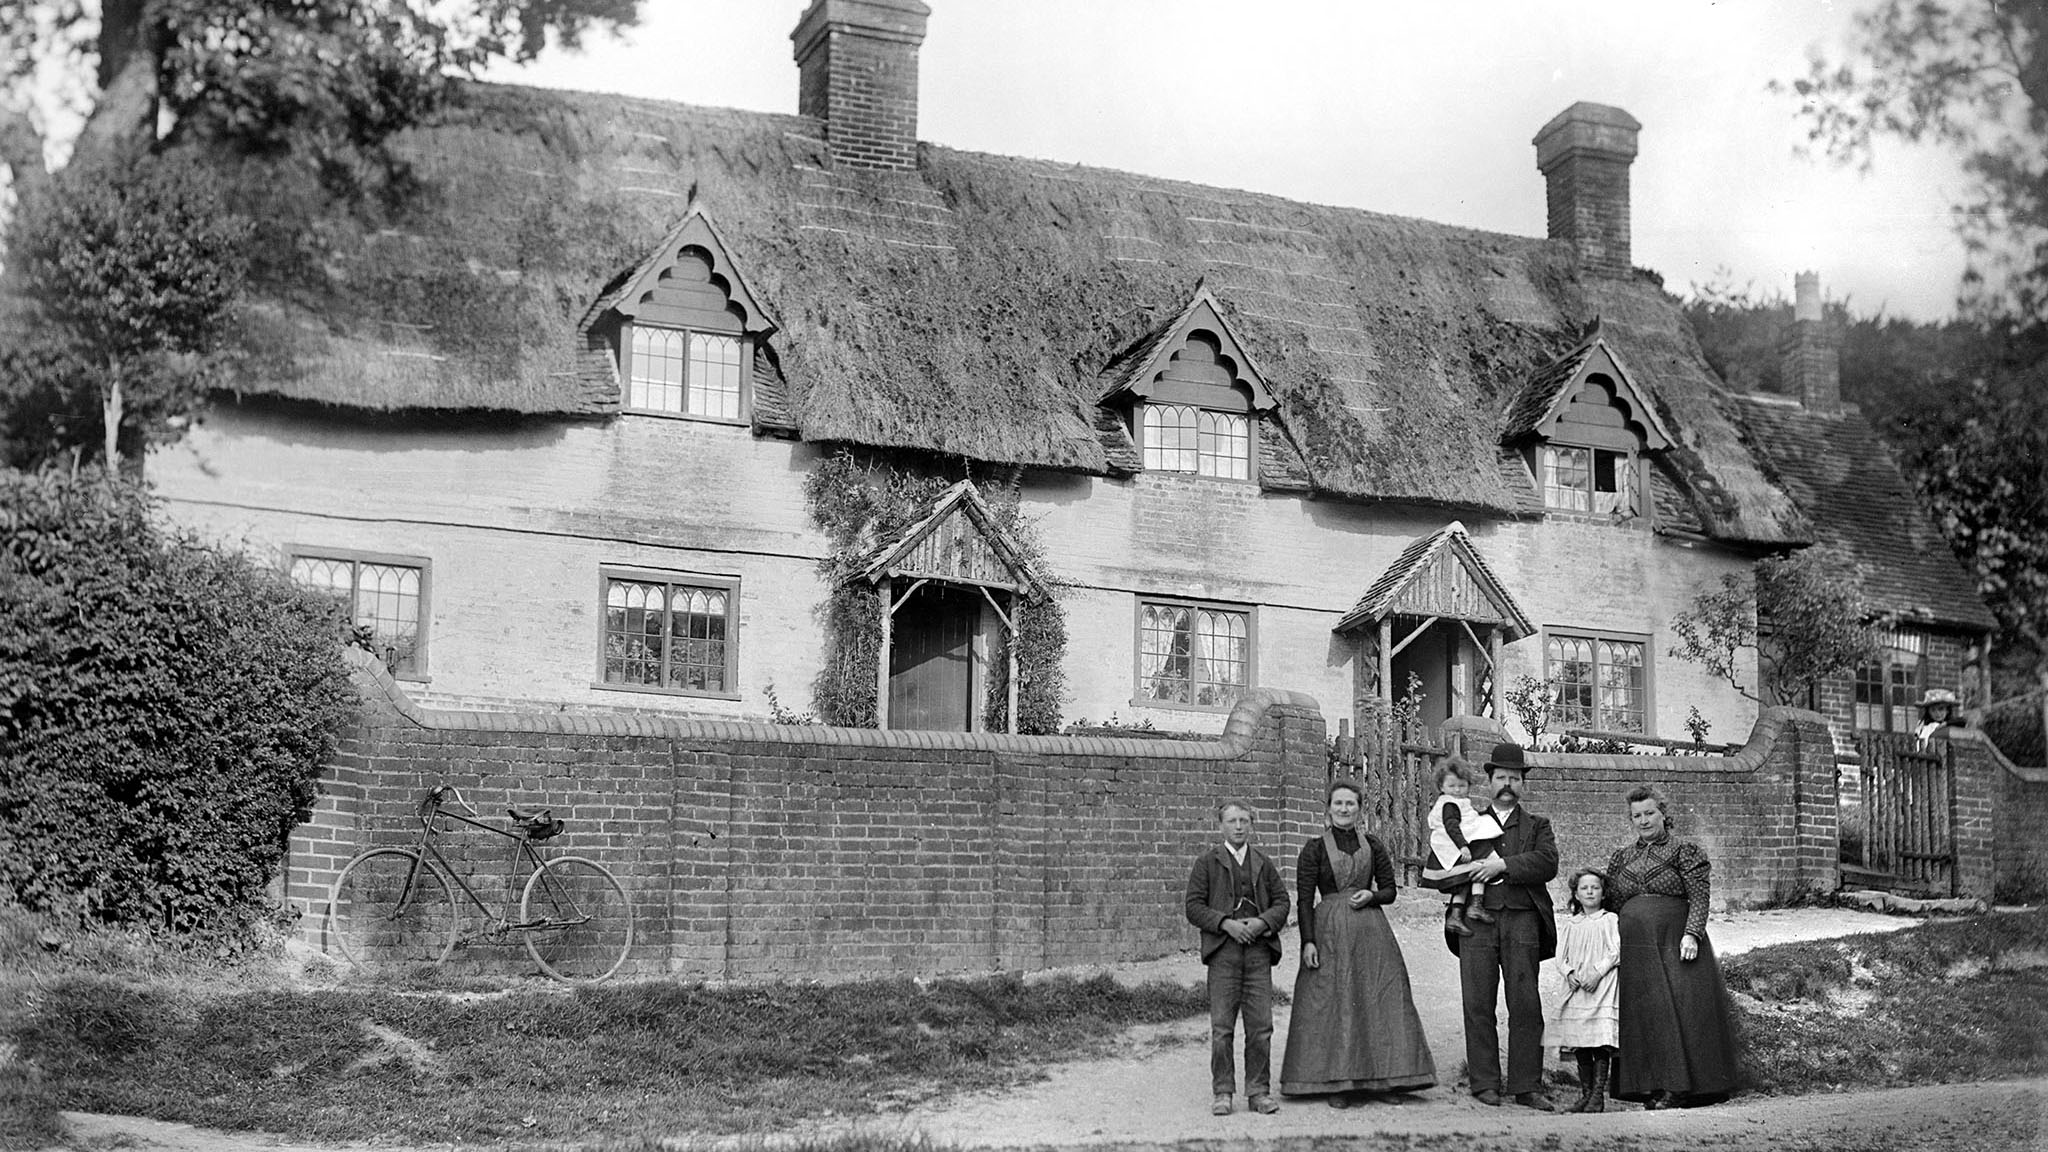 Row of unidentified brick and thatch cottages with family group in front